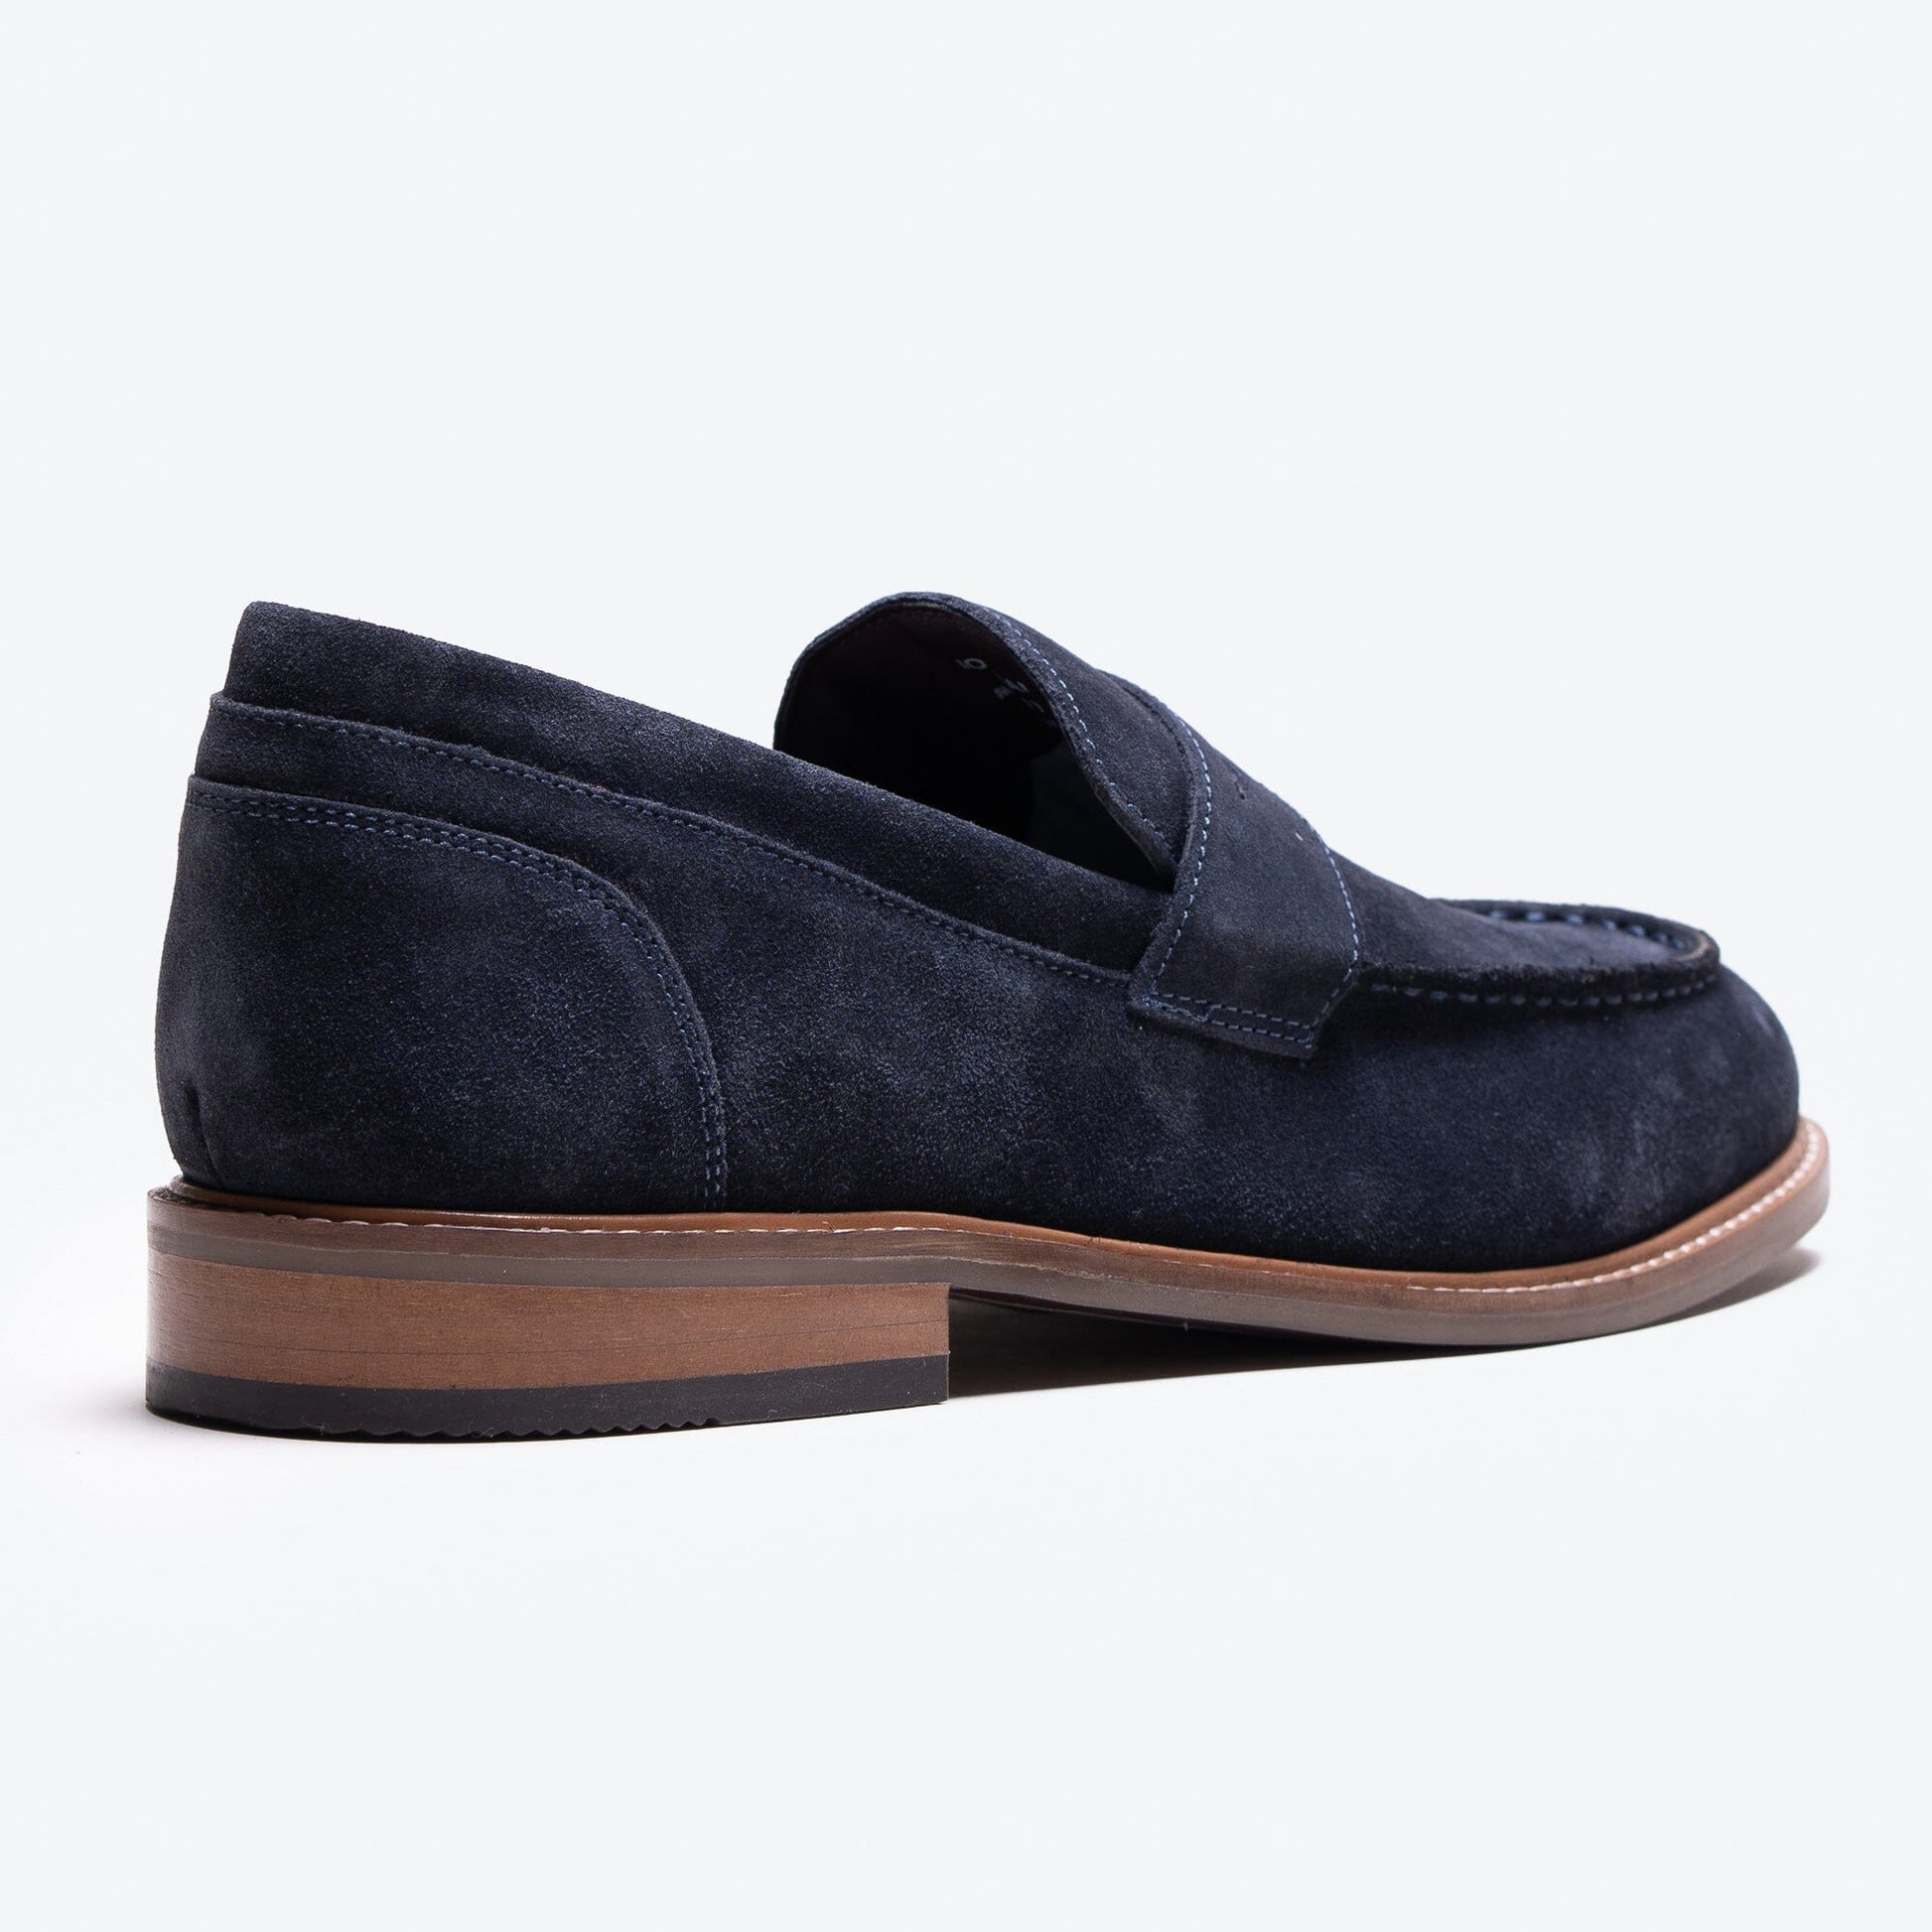 Jordan Navy Suede Loafers - Shoes - - THREADPEPPER